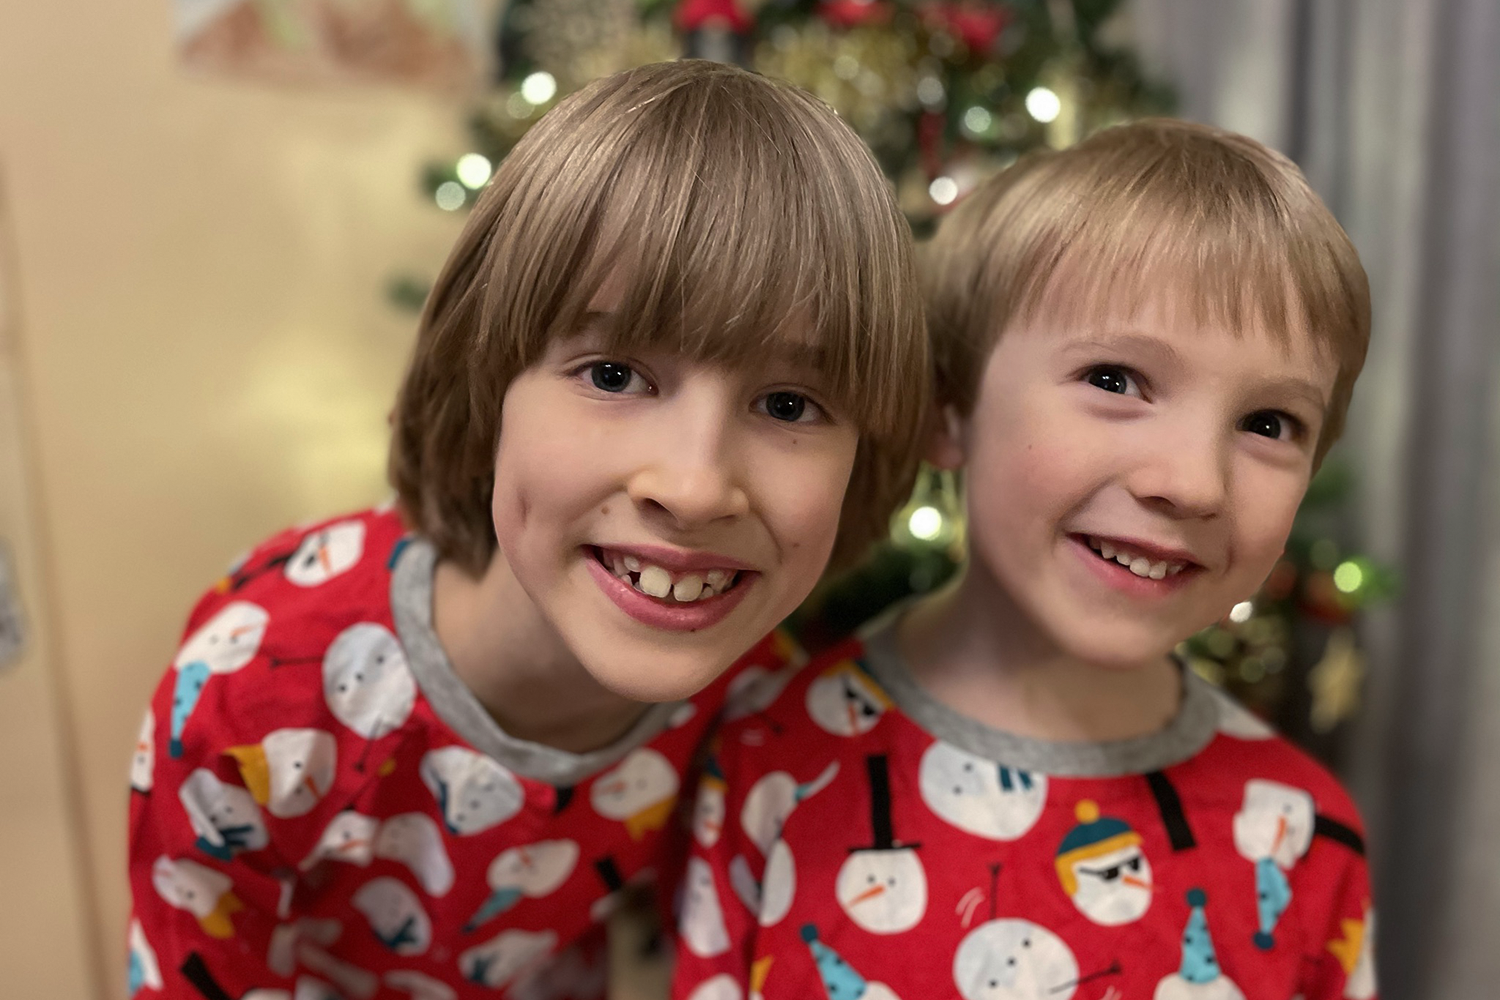 Toby and Gabe in matching pyjamas on Christmas Eve